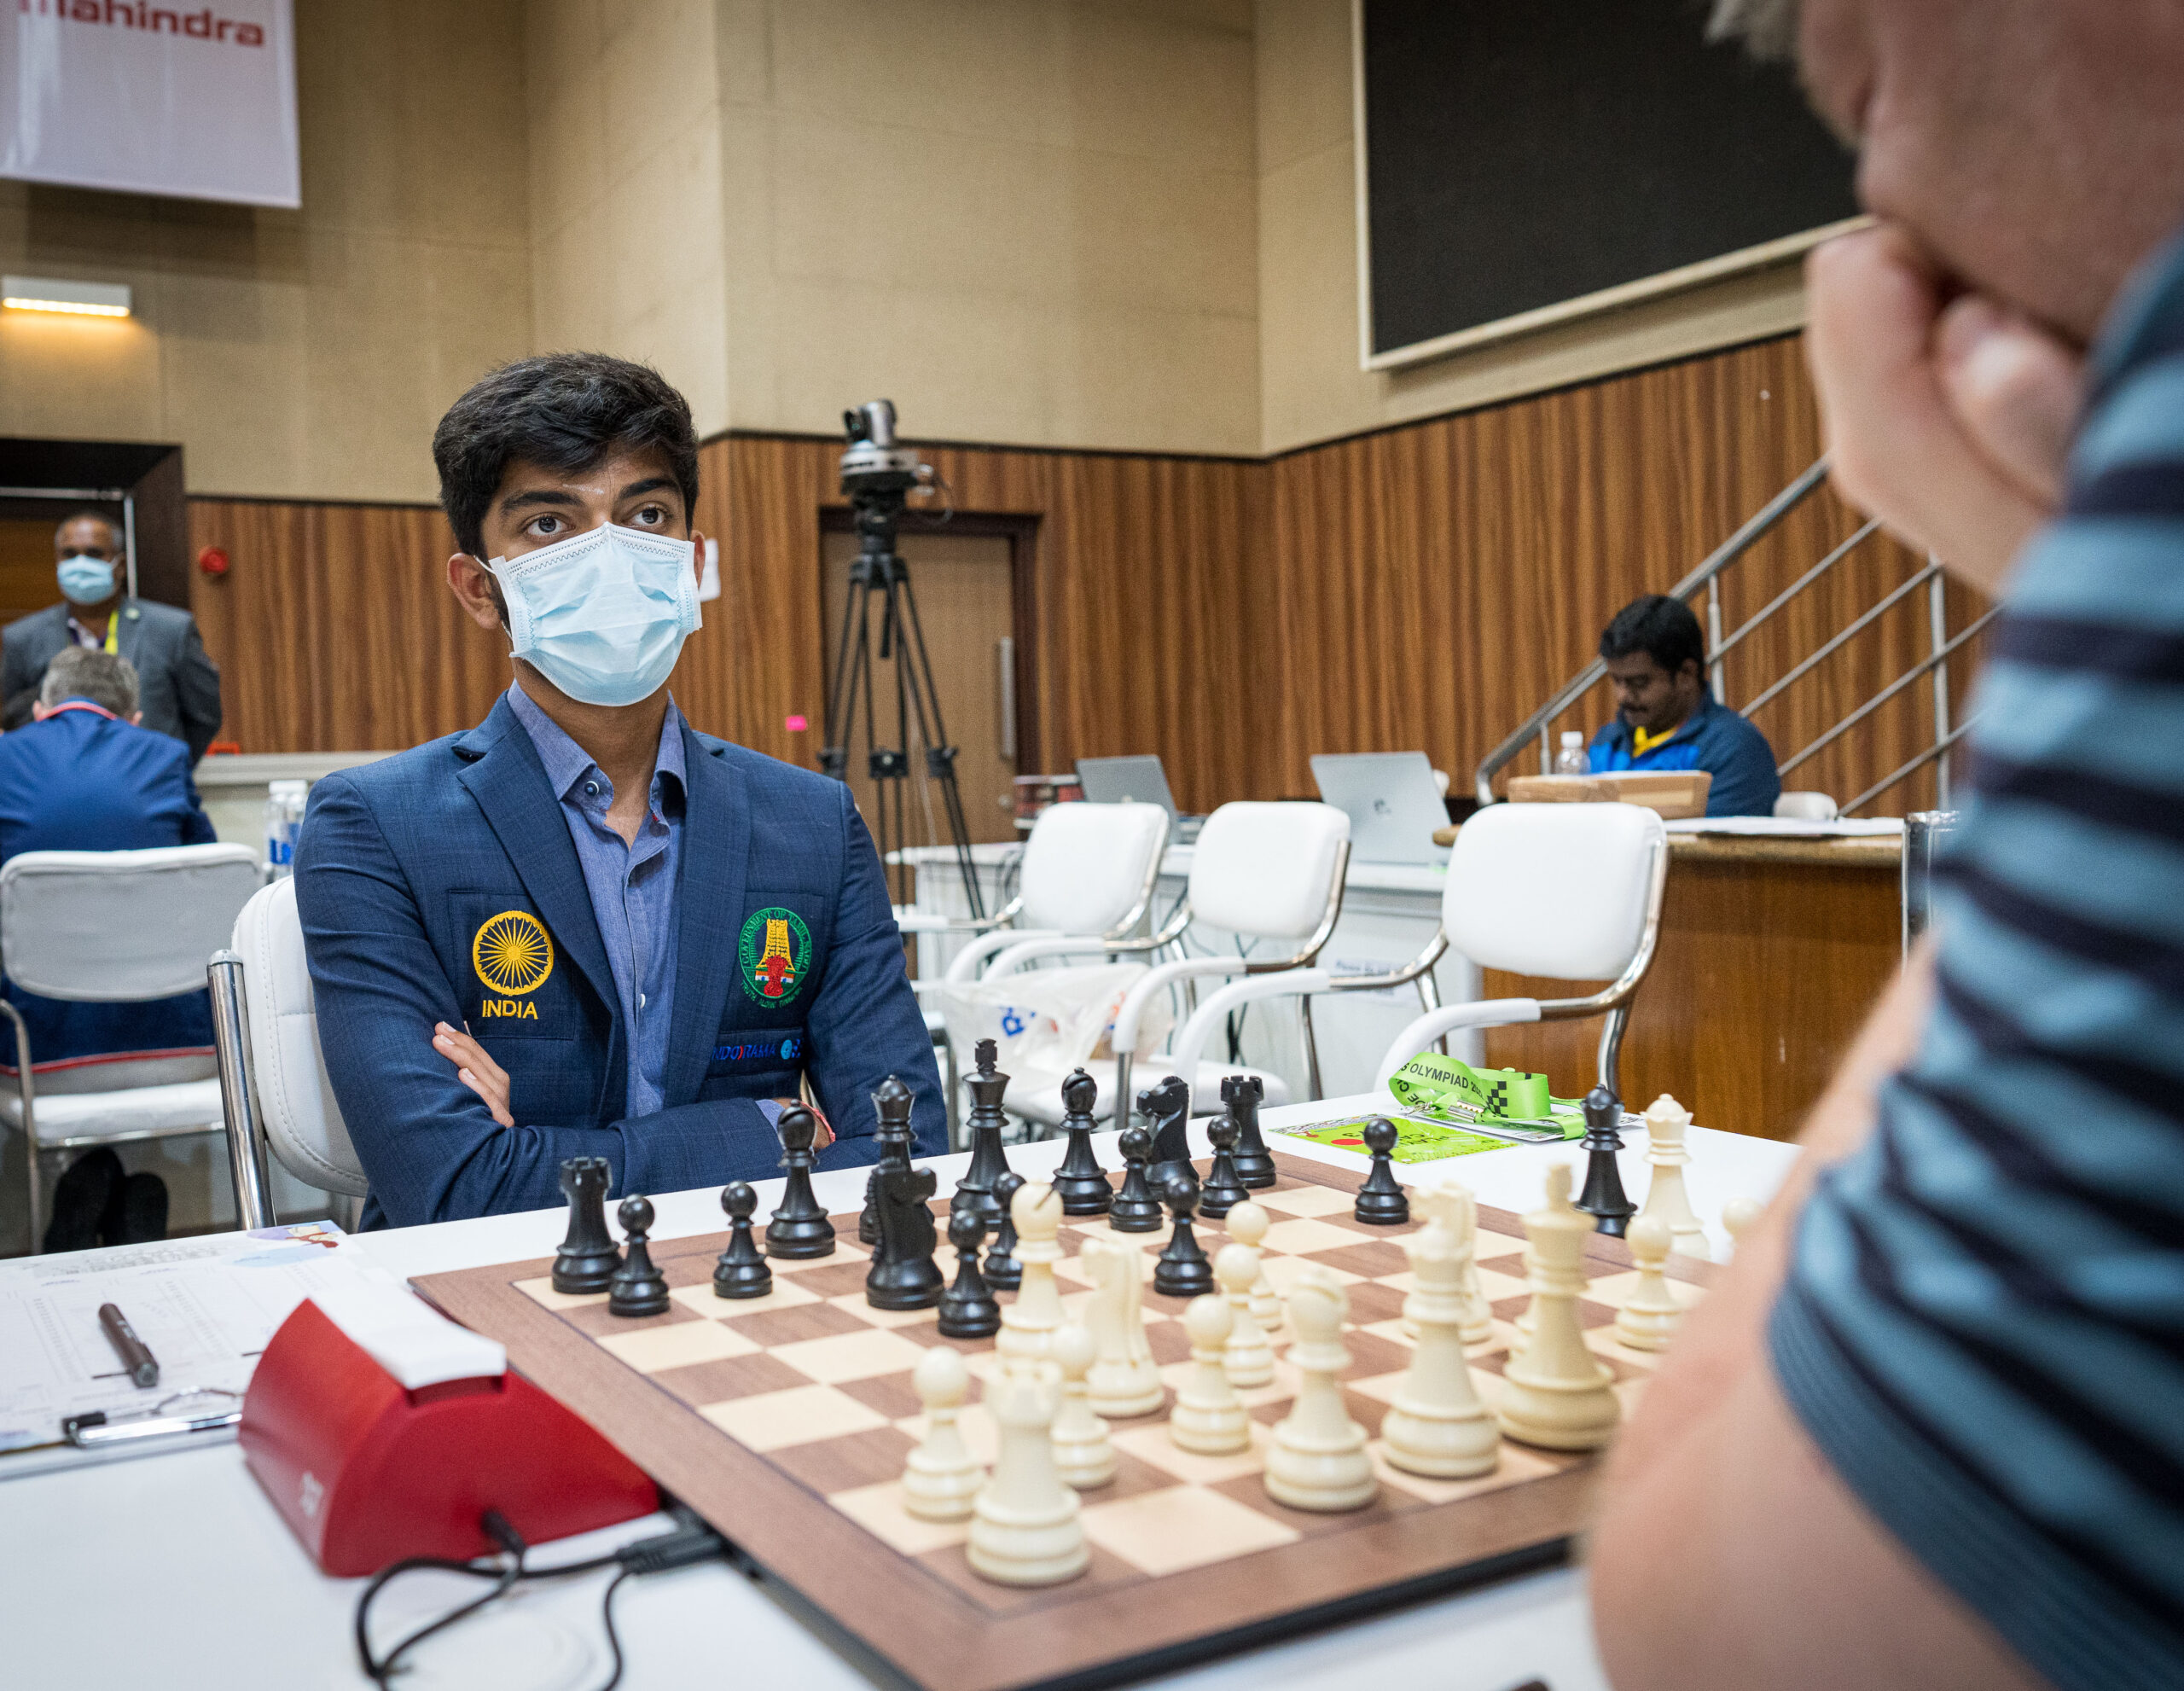 International Chess Federation on X: 16-year-old Indian star Gukesh D wins  his 5th game in a row, this time against Alexei Shirov! Gukesh was one of  the torchbearers during the opening ceremony